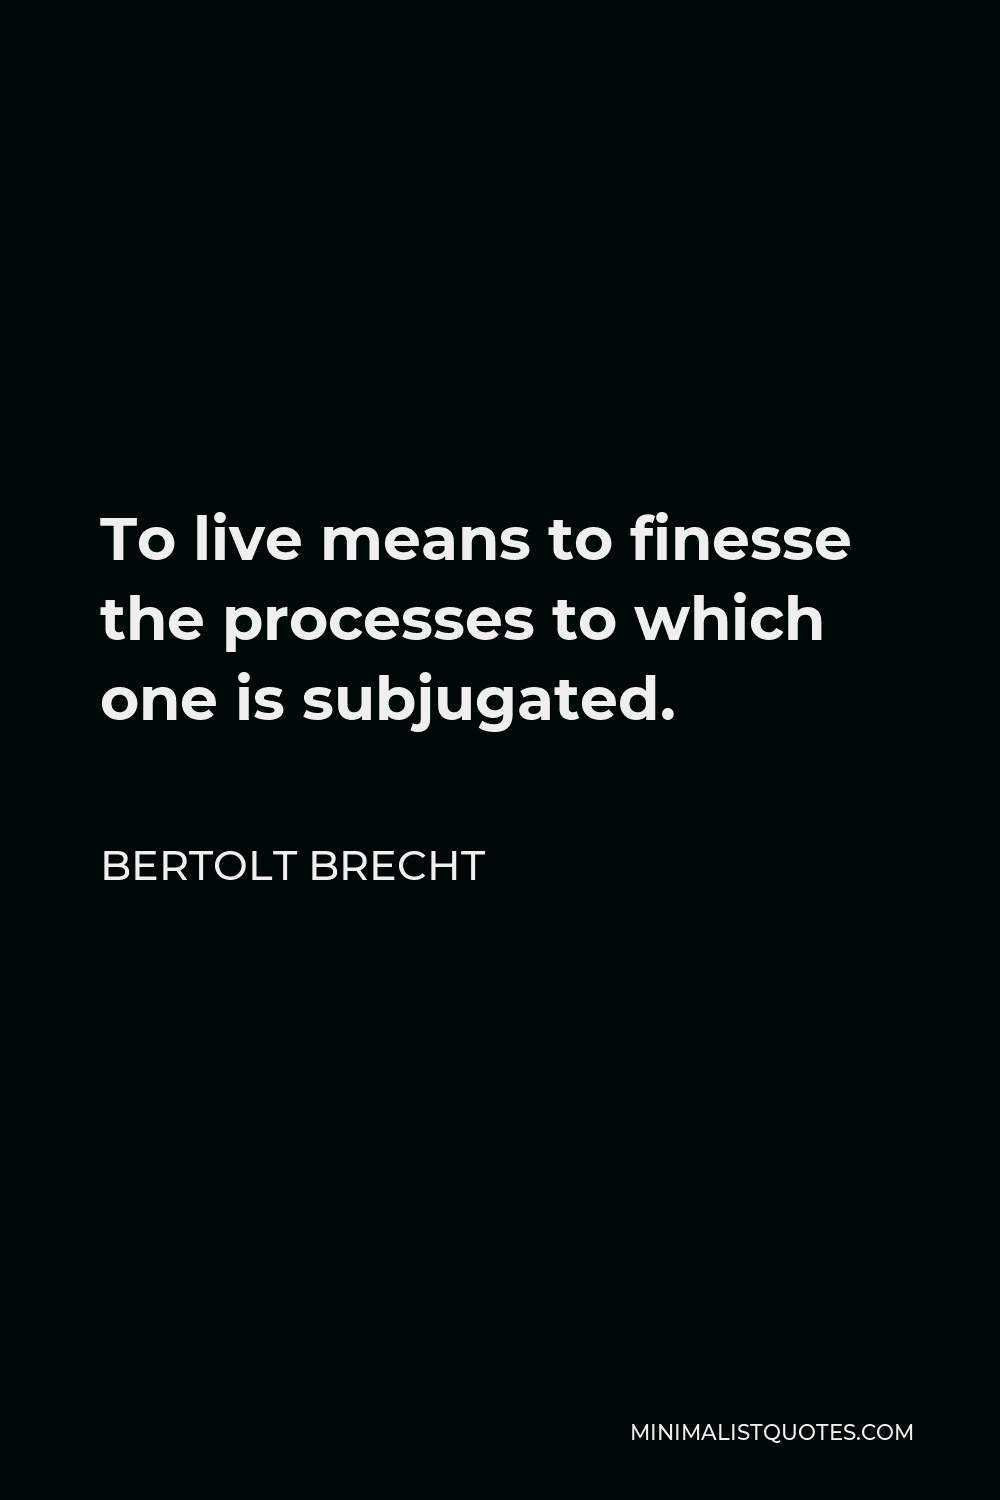 Bertolt Brecht Quote - To live means to finesse the processes to which one is subjugated.